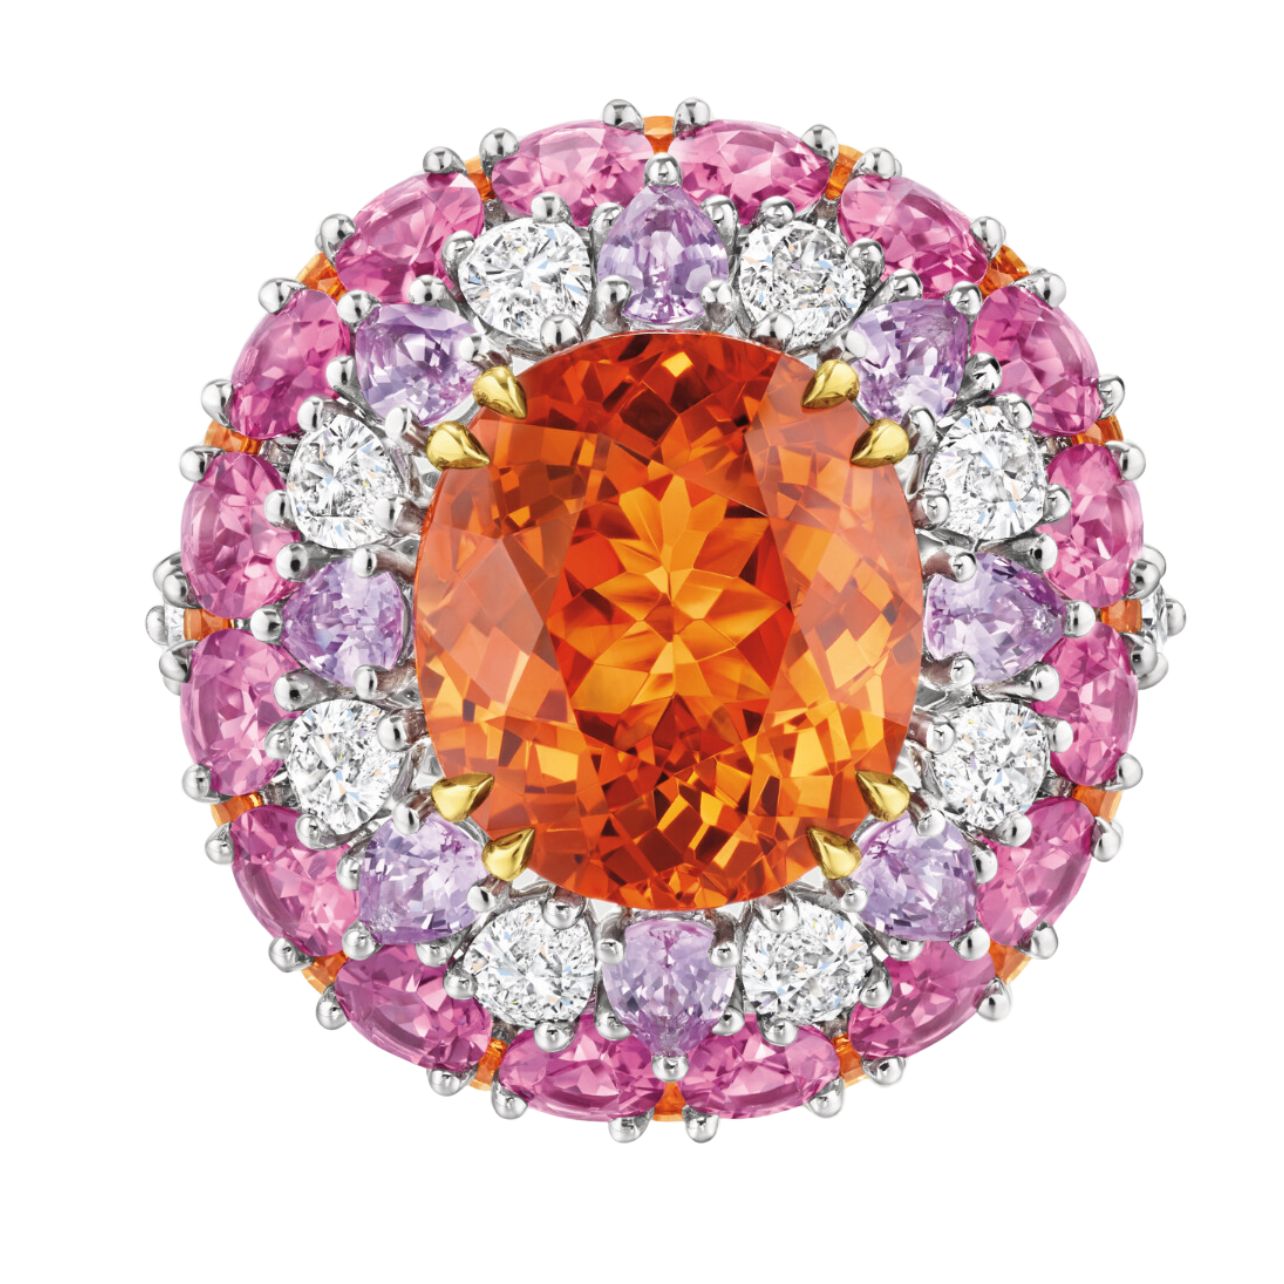 Winston Candy ring in platinum and 18k yellow gold featuring an orange spessartine garnet, pink sapphires, rubellites, and diamonds.